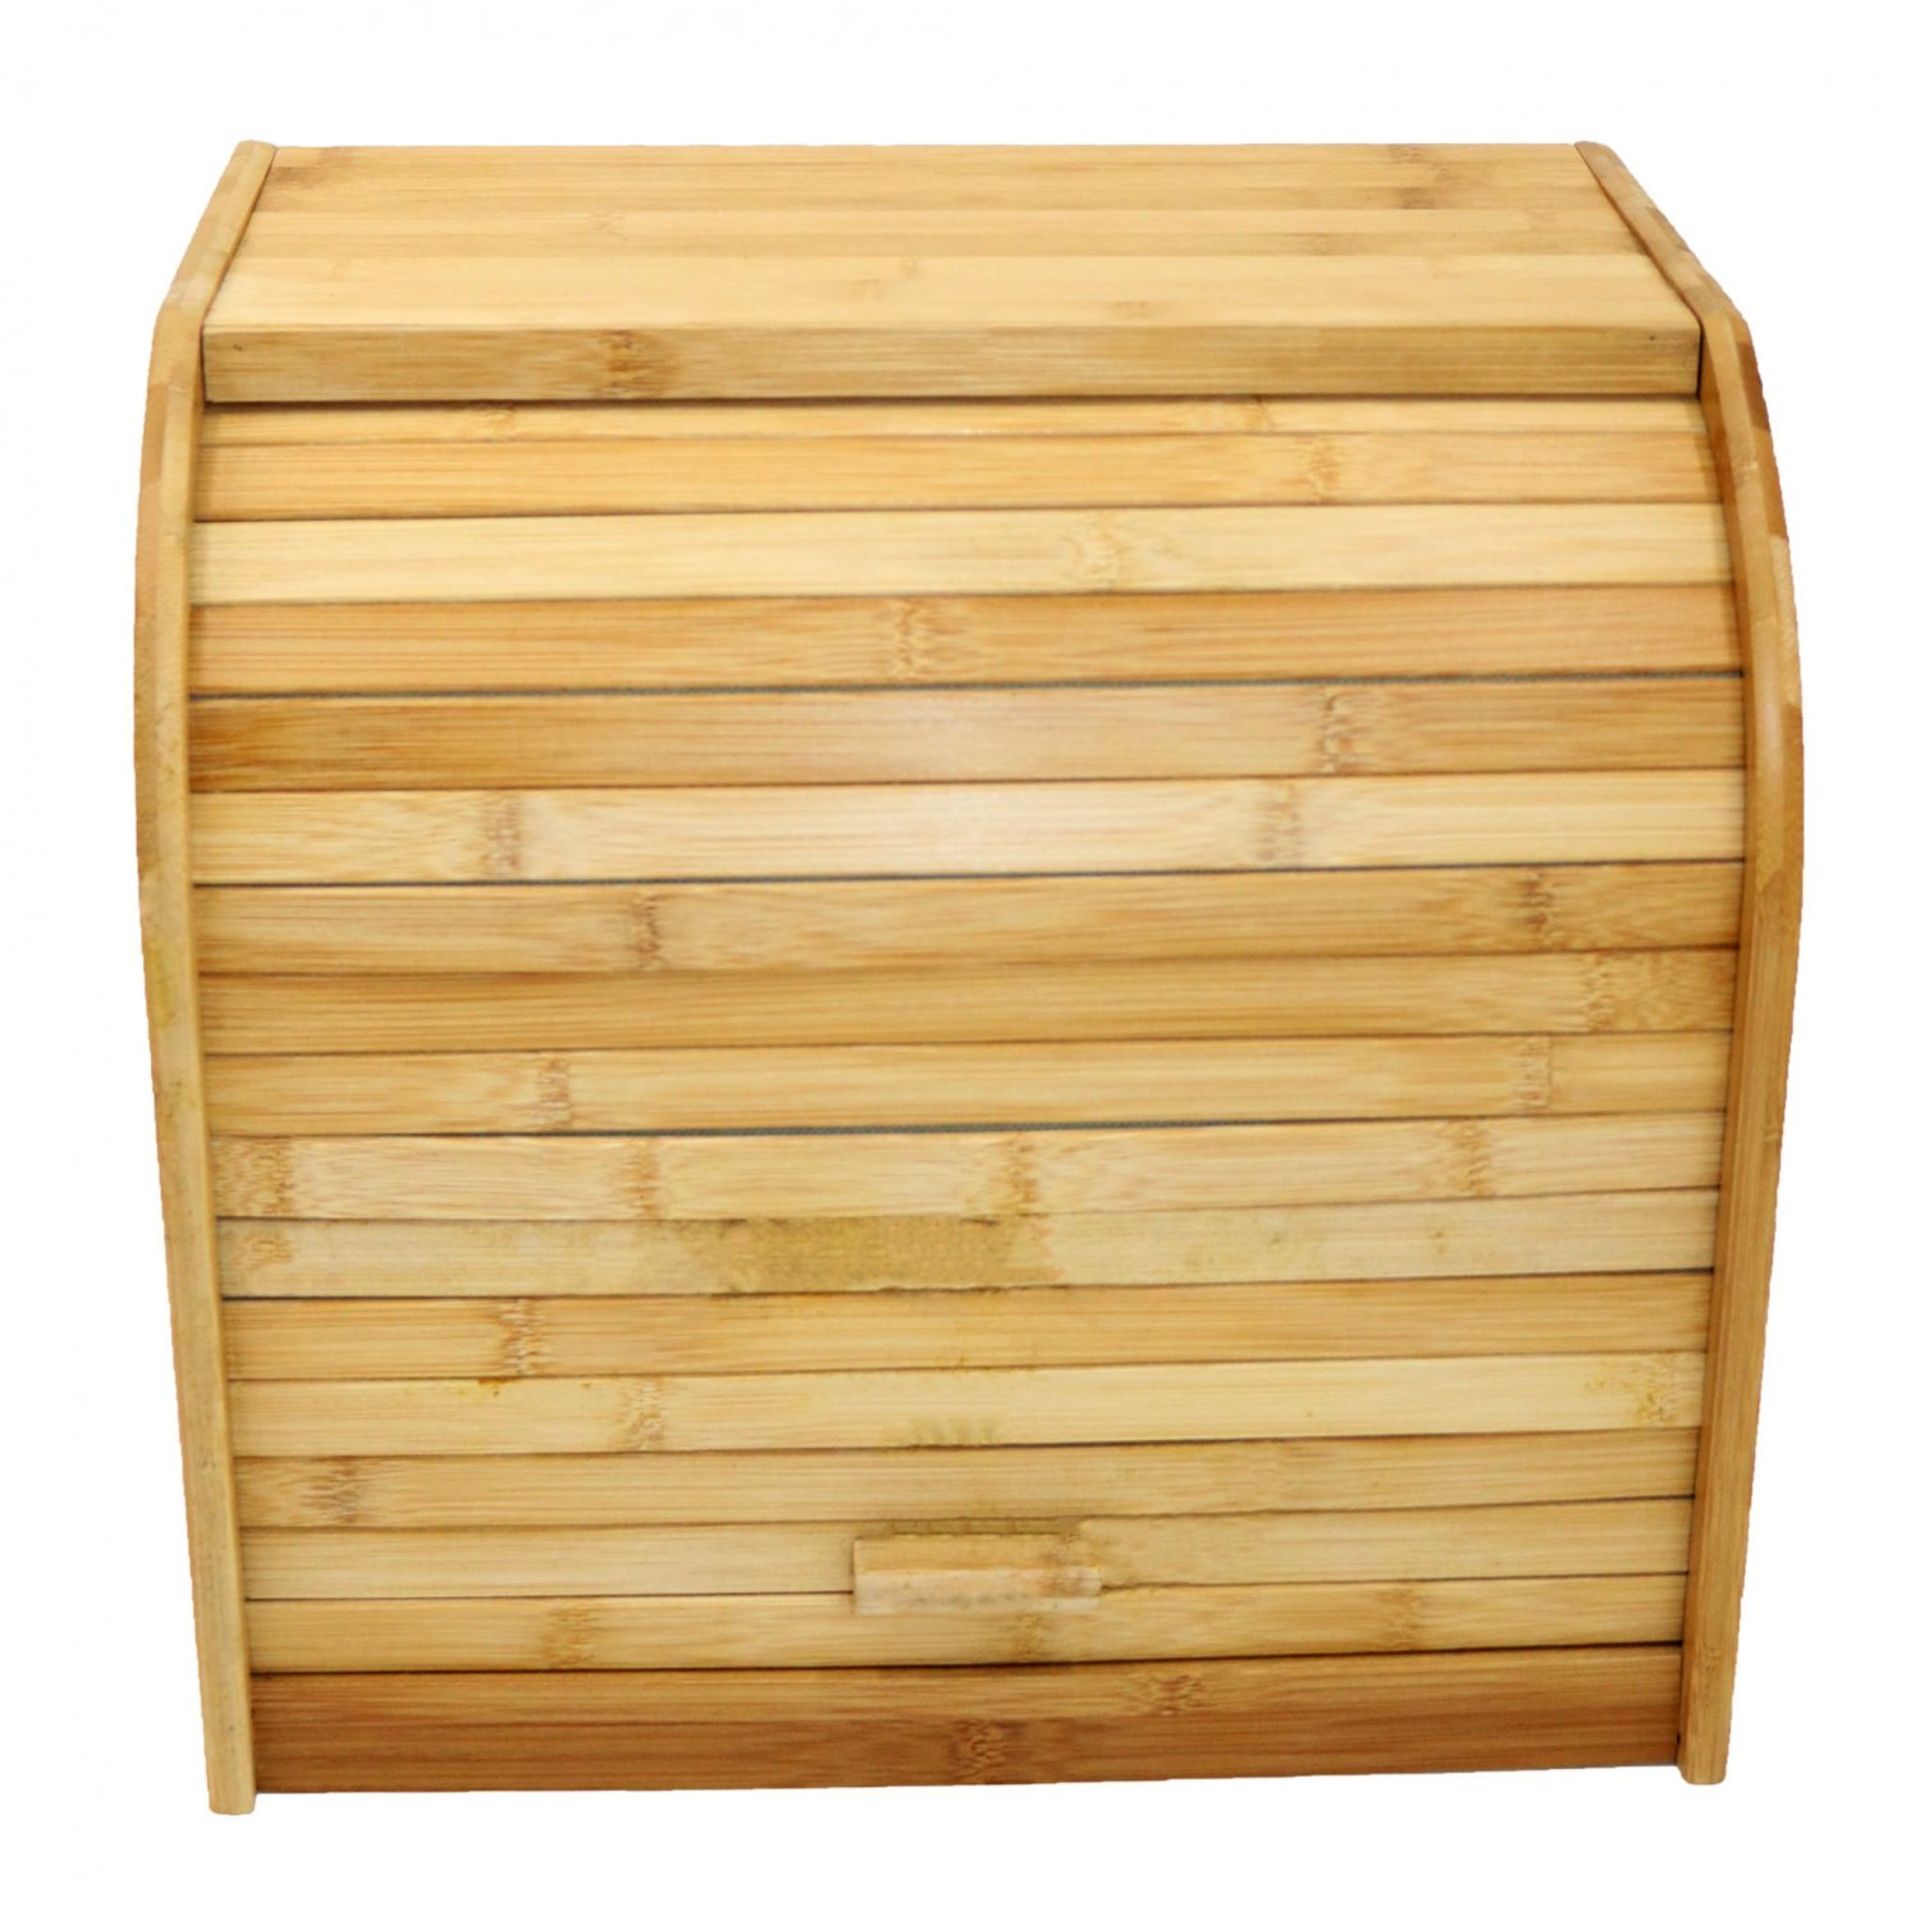 (D24) Double Layer Roll Top Bamboo Wooden Bread Bin Kitchen Storage 100% Natural Bamboo Wipe ... - Image 2 of 2